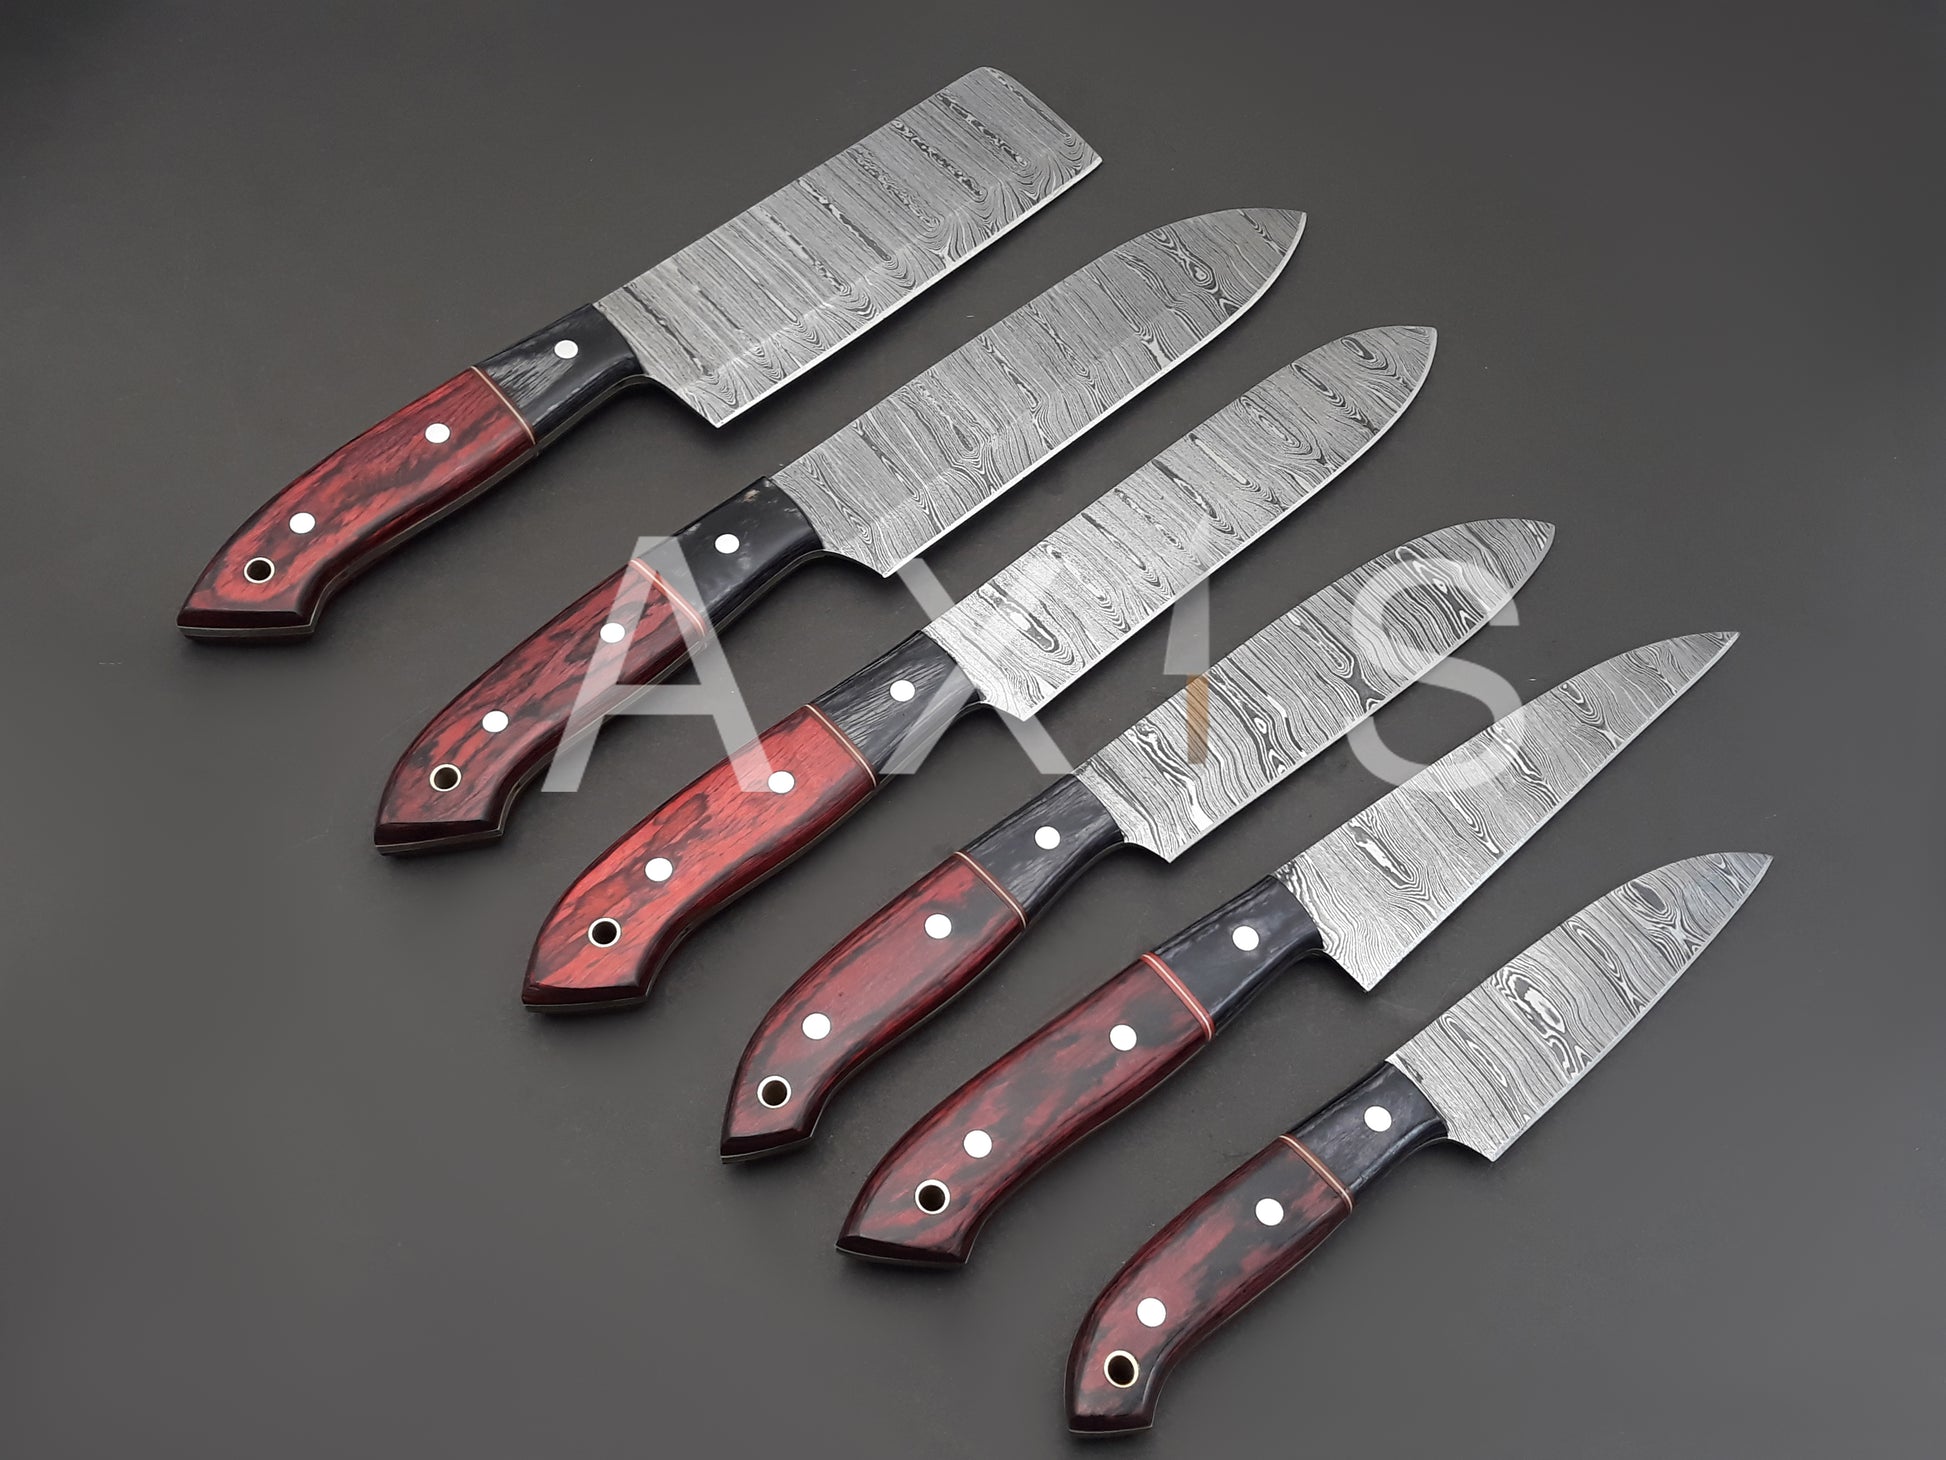 Hand Forged Chef's Knives Handmade Knives Chef Knife Set High Quality  Remarkable Damascus Kitchen Knife Set a Anniversary Gift. 